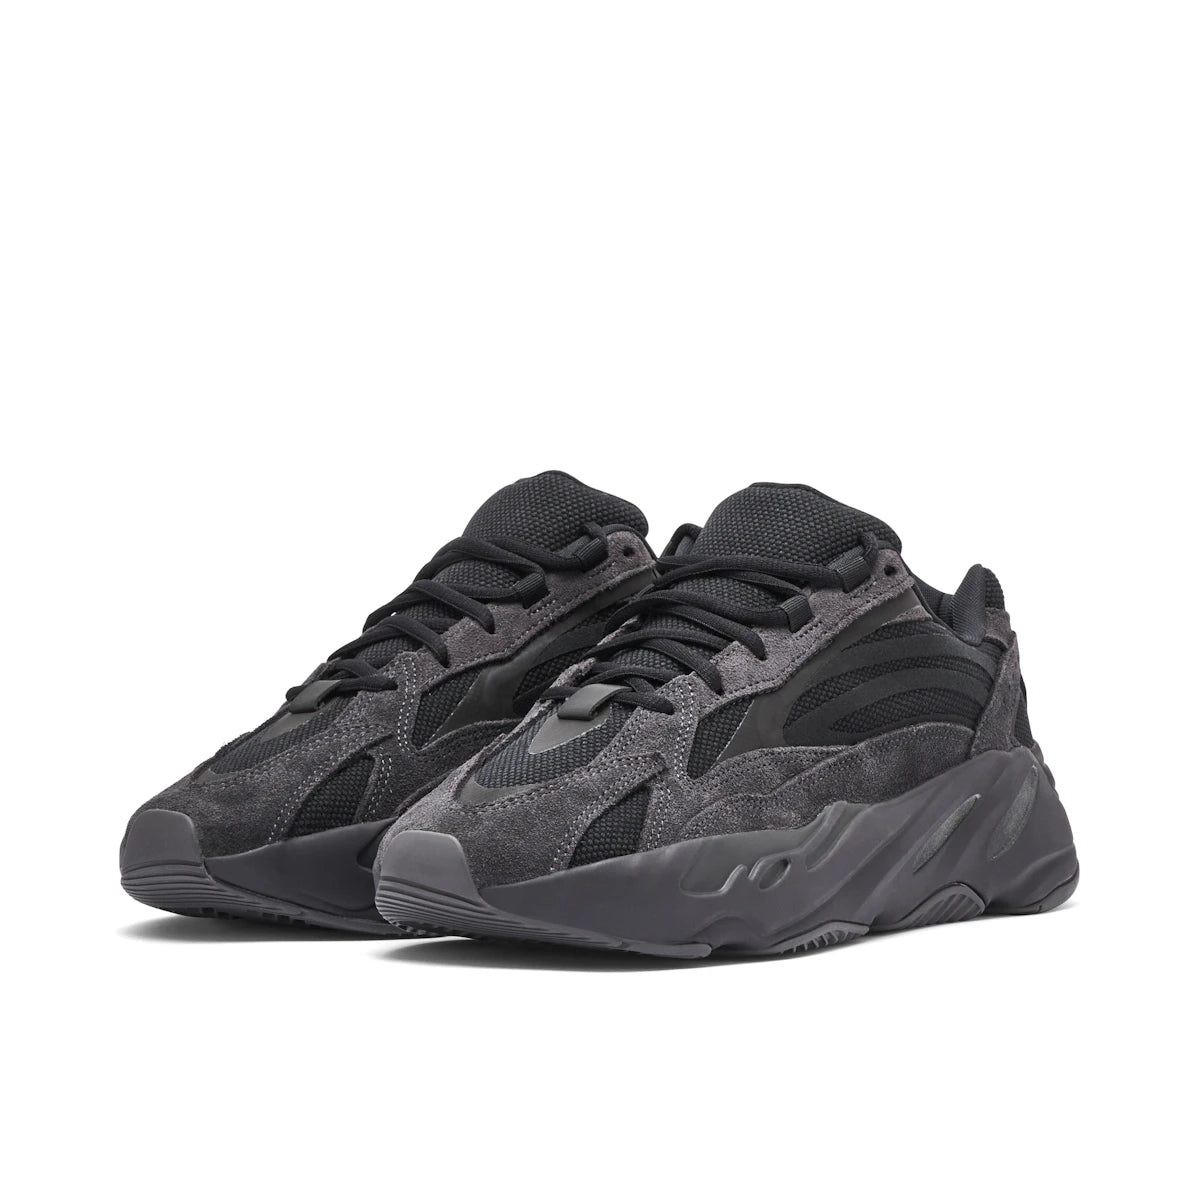 Adidas Yeezy Boost 700 V2 Vanta by Yeezy from £328.00